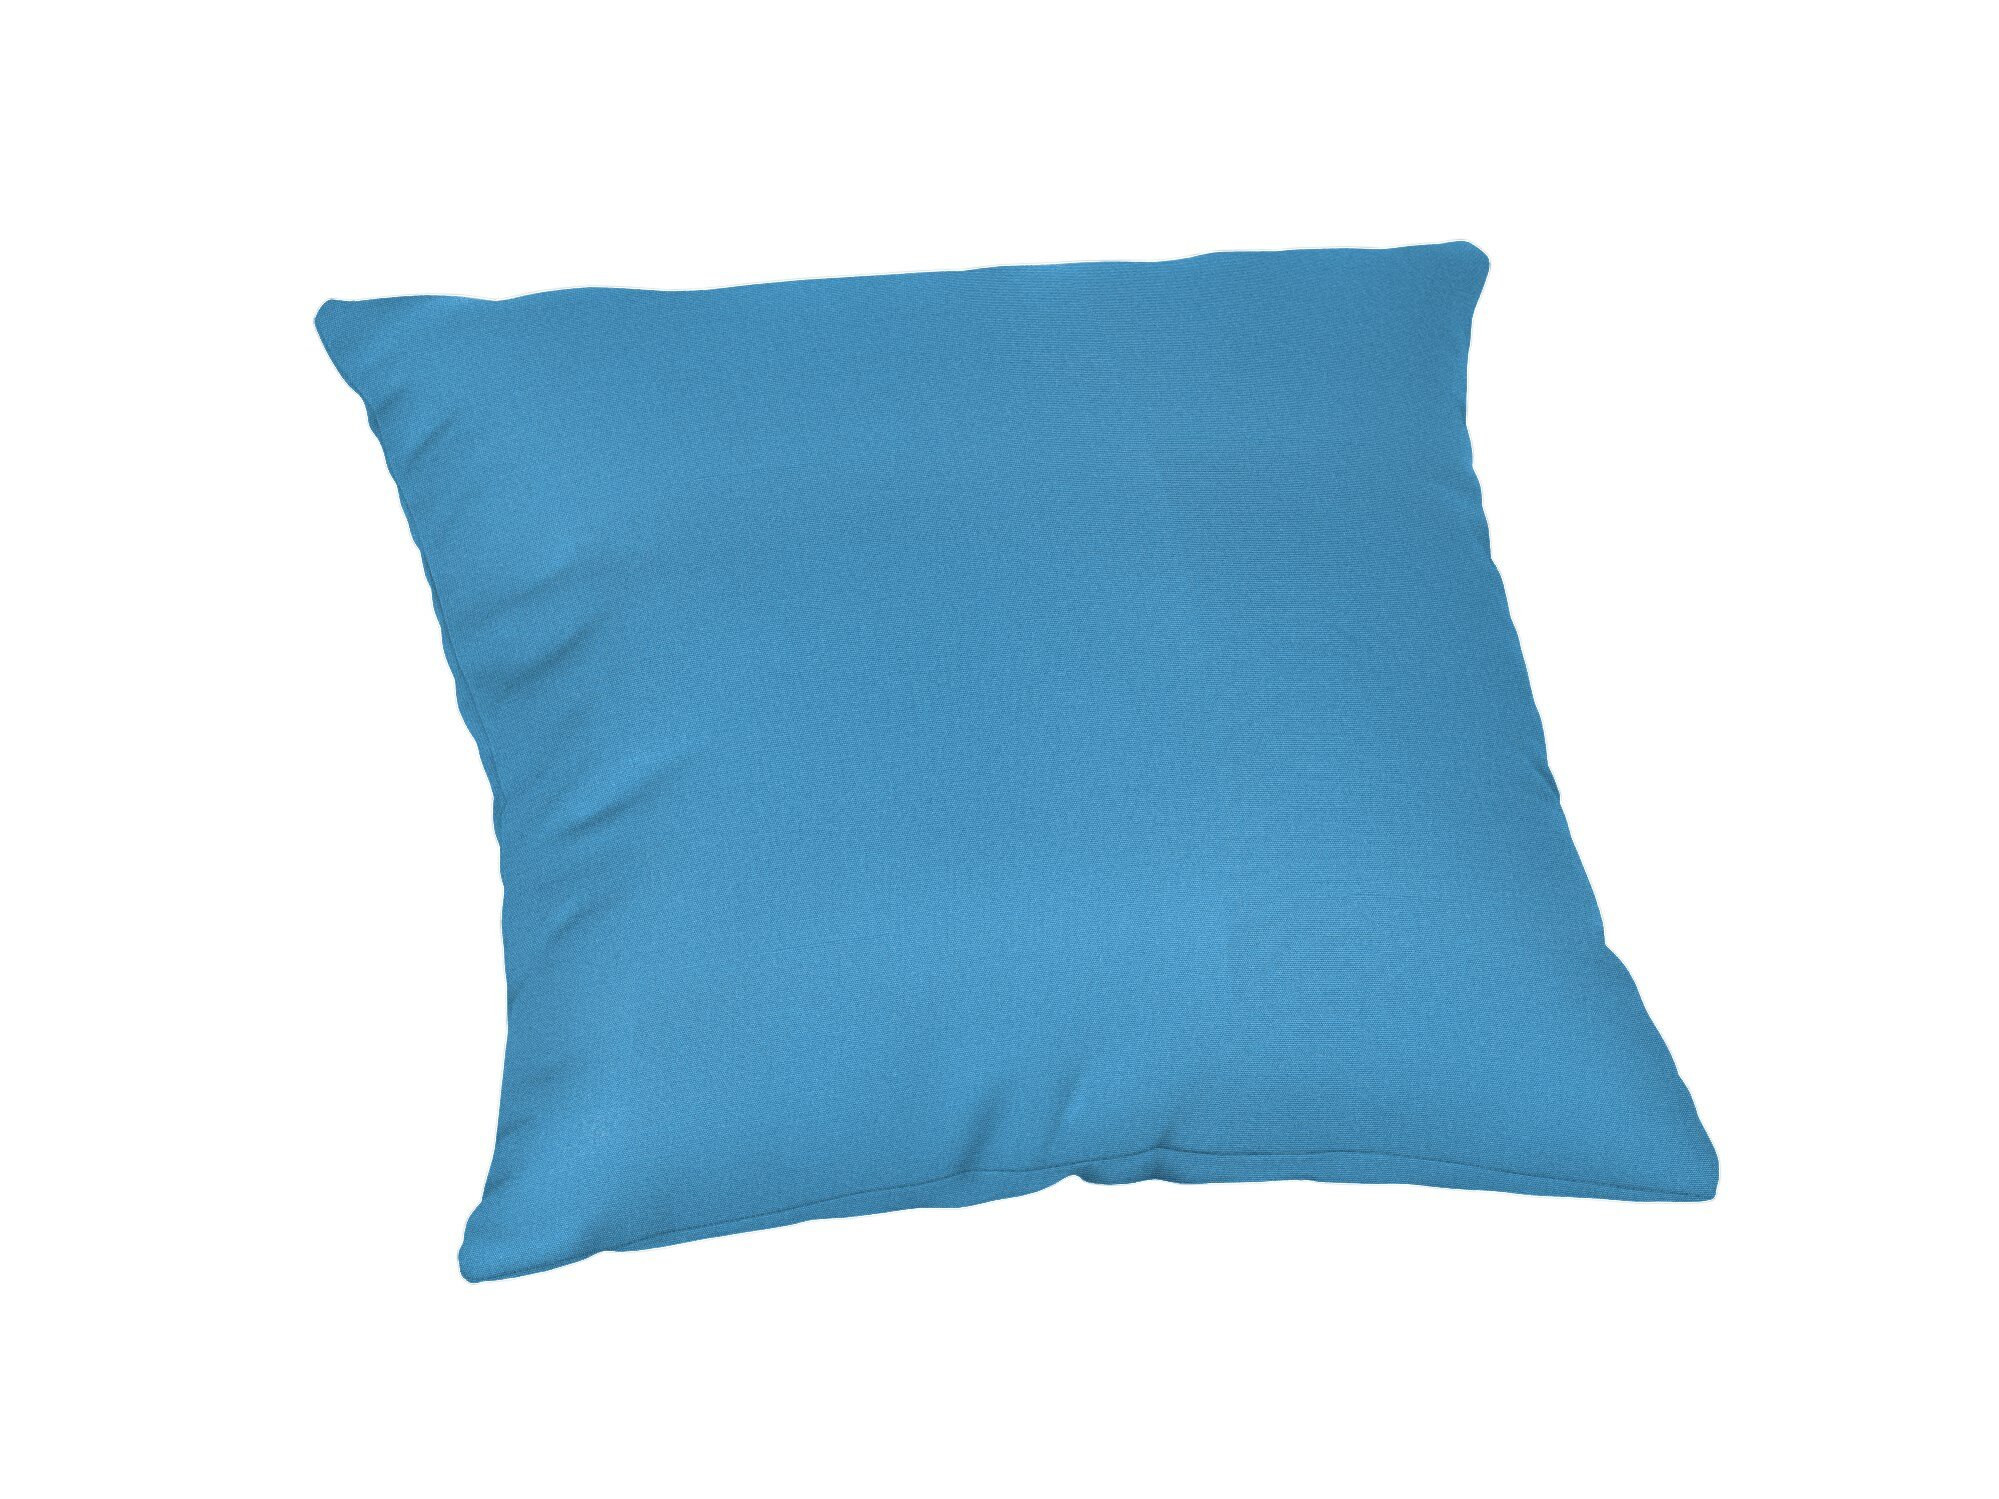 MGTAVC2025OP26 Size: 26X26X6 - KAVKA Designs Sandoval Blue Indoor-Outdoor Pillow, - NAVAJO Collection Blue/Ivory 